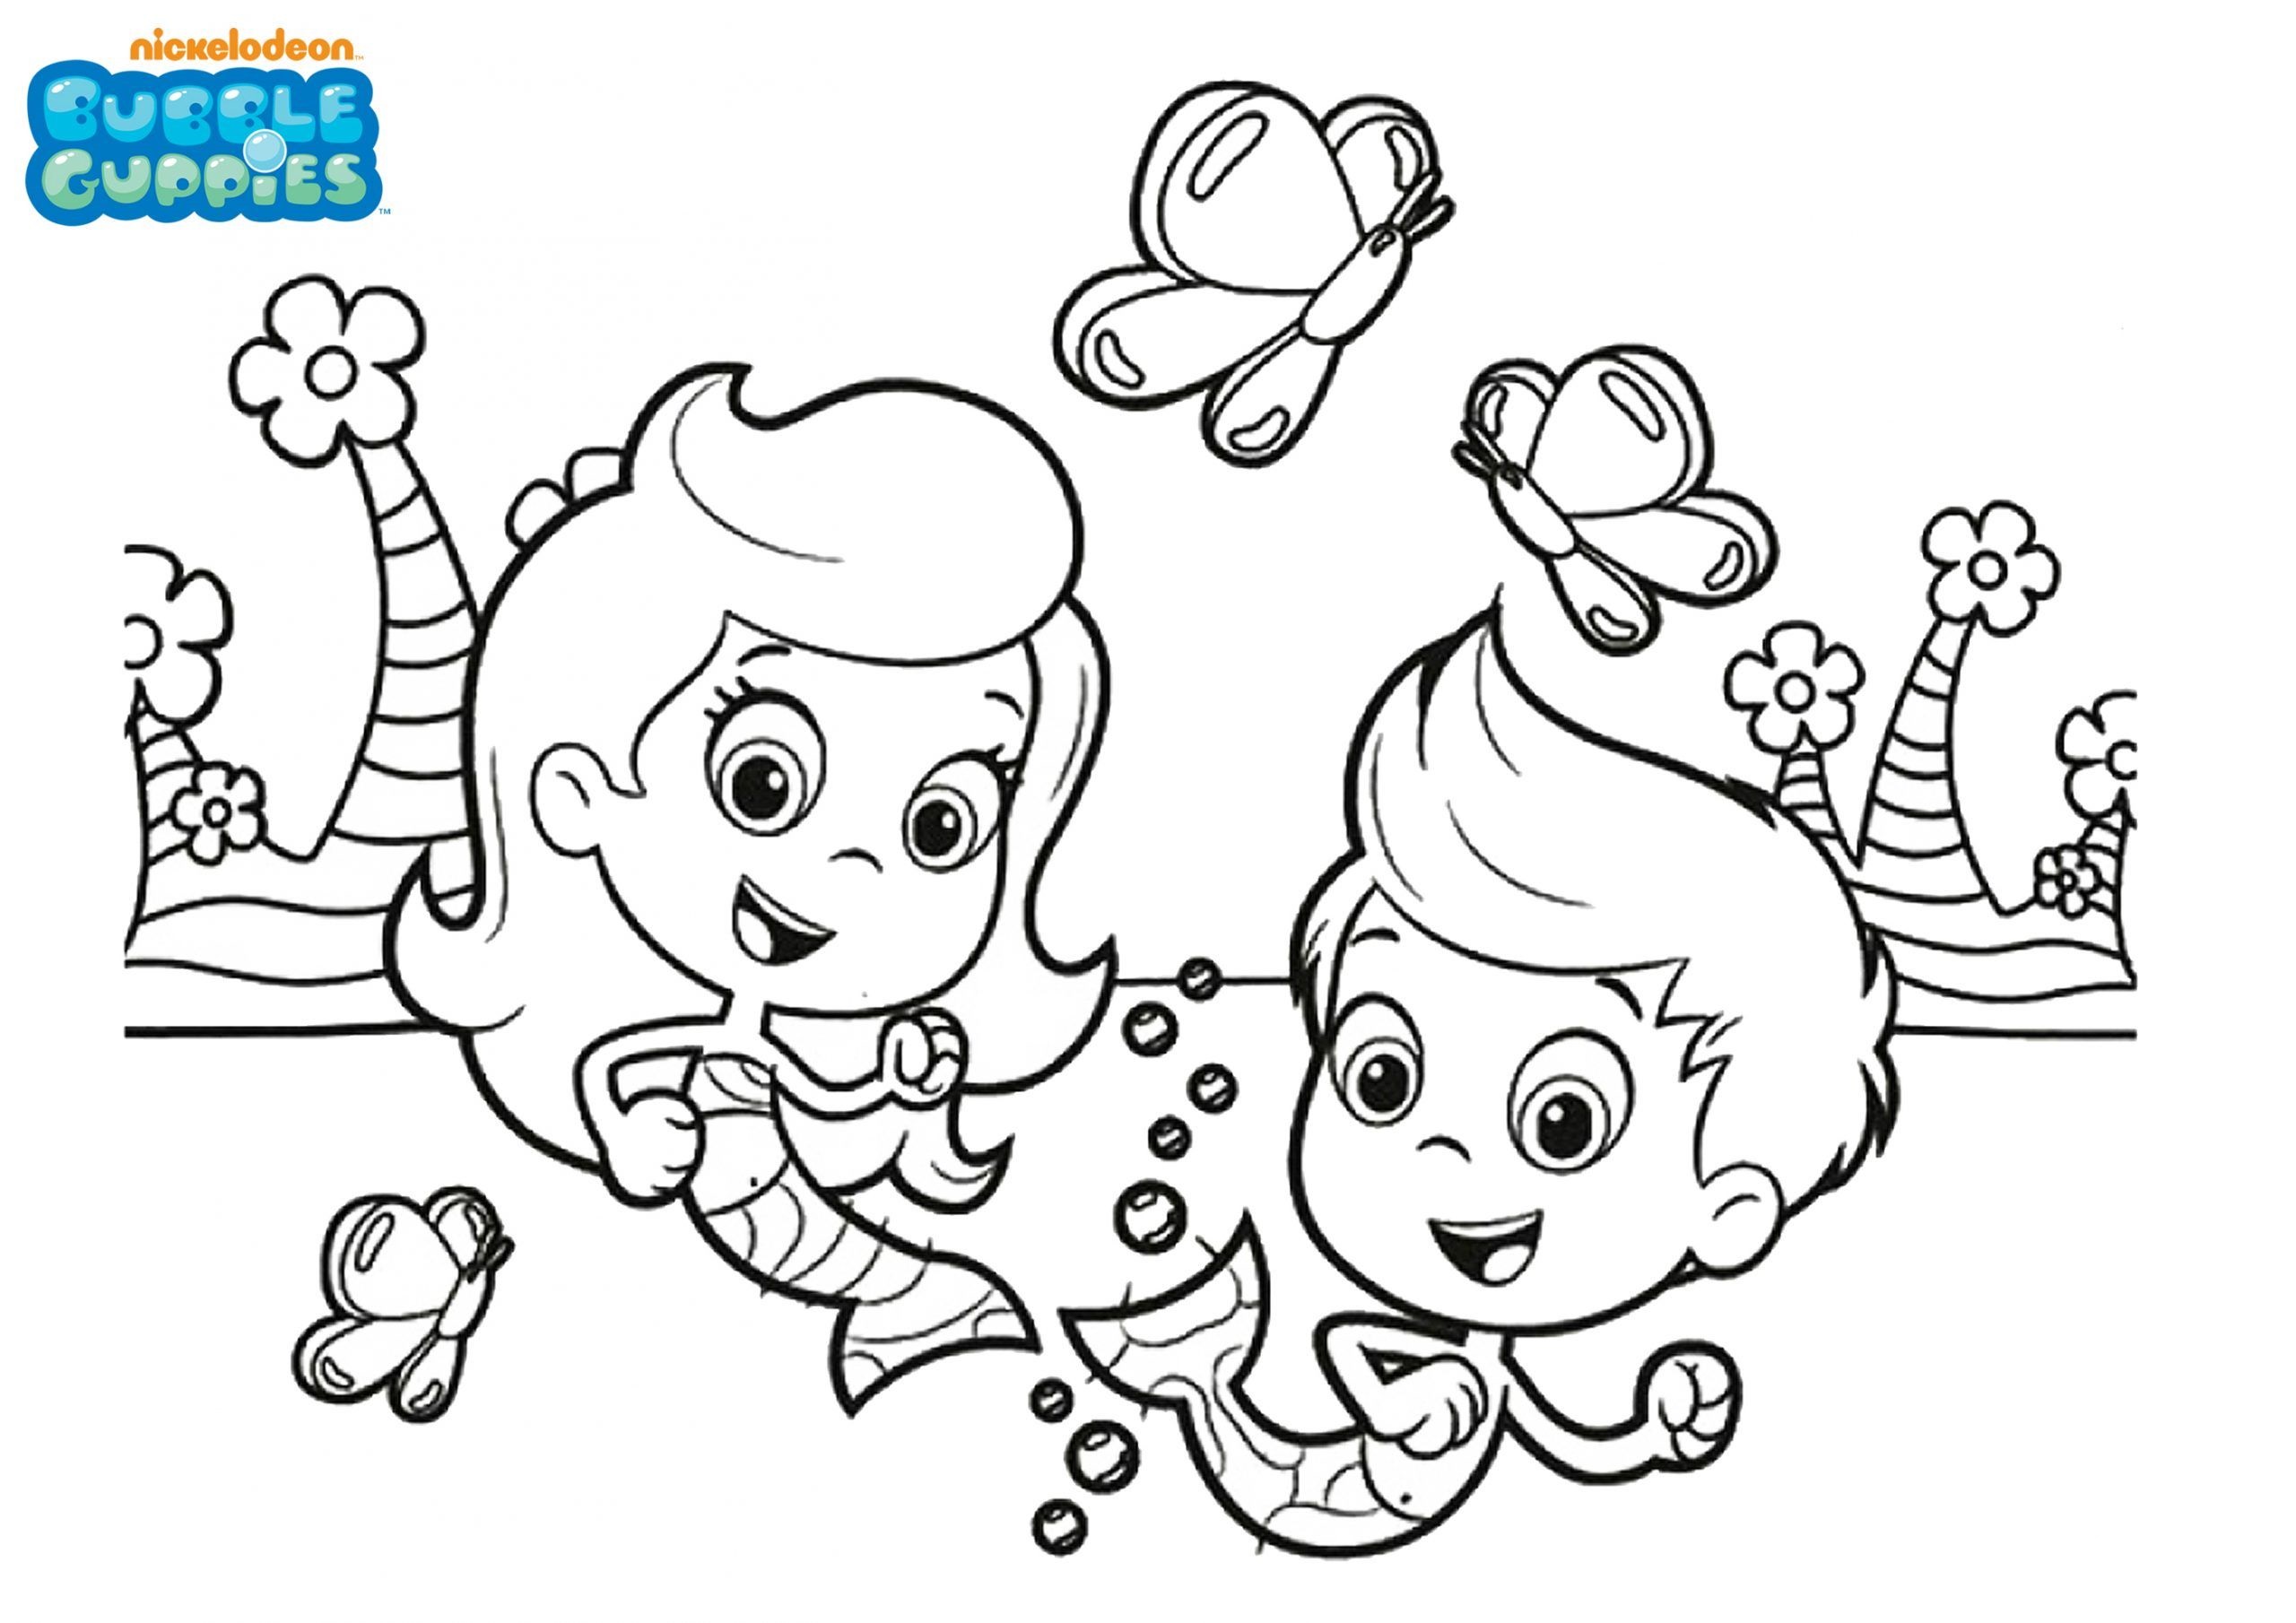 Bubble Guppies Coloring Pages - Bubble Guppies Coloring Pages